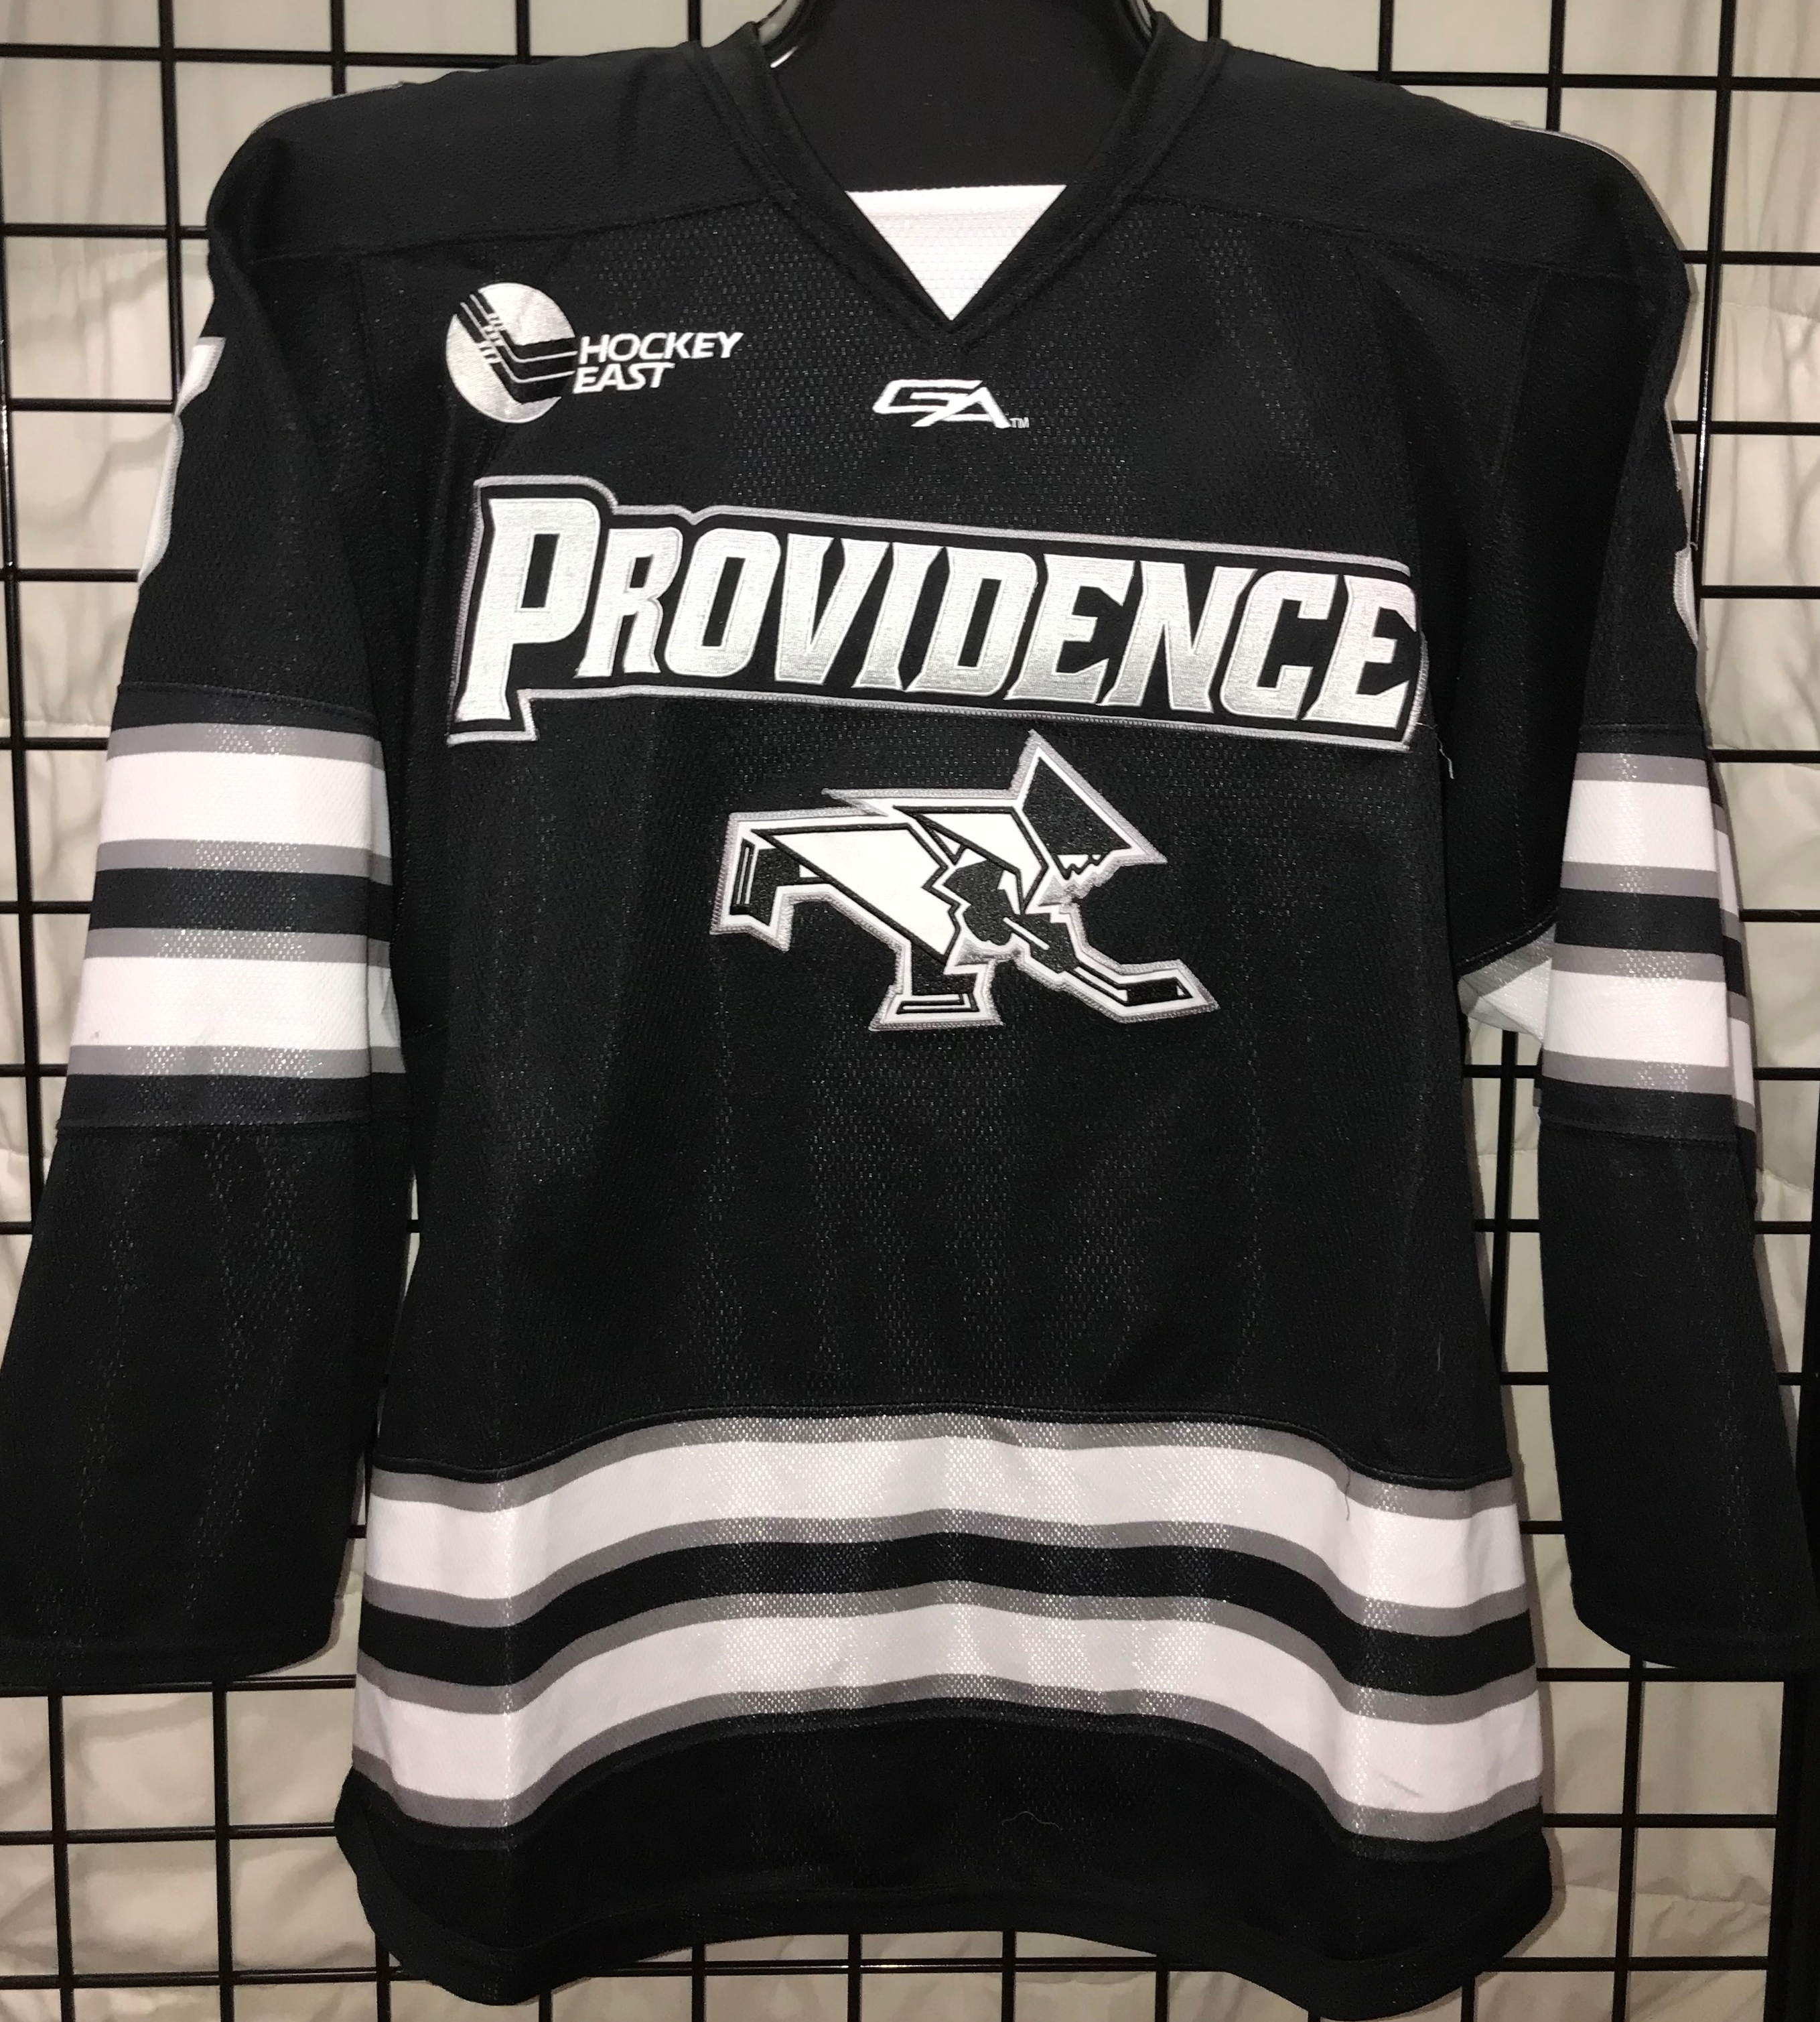 GVJerseys - Game Worn Hockey Jersey Collection - Providence College